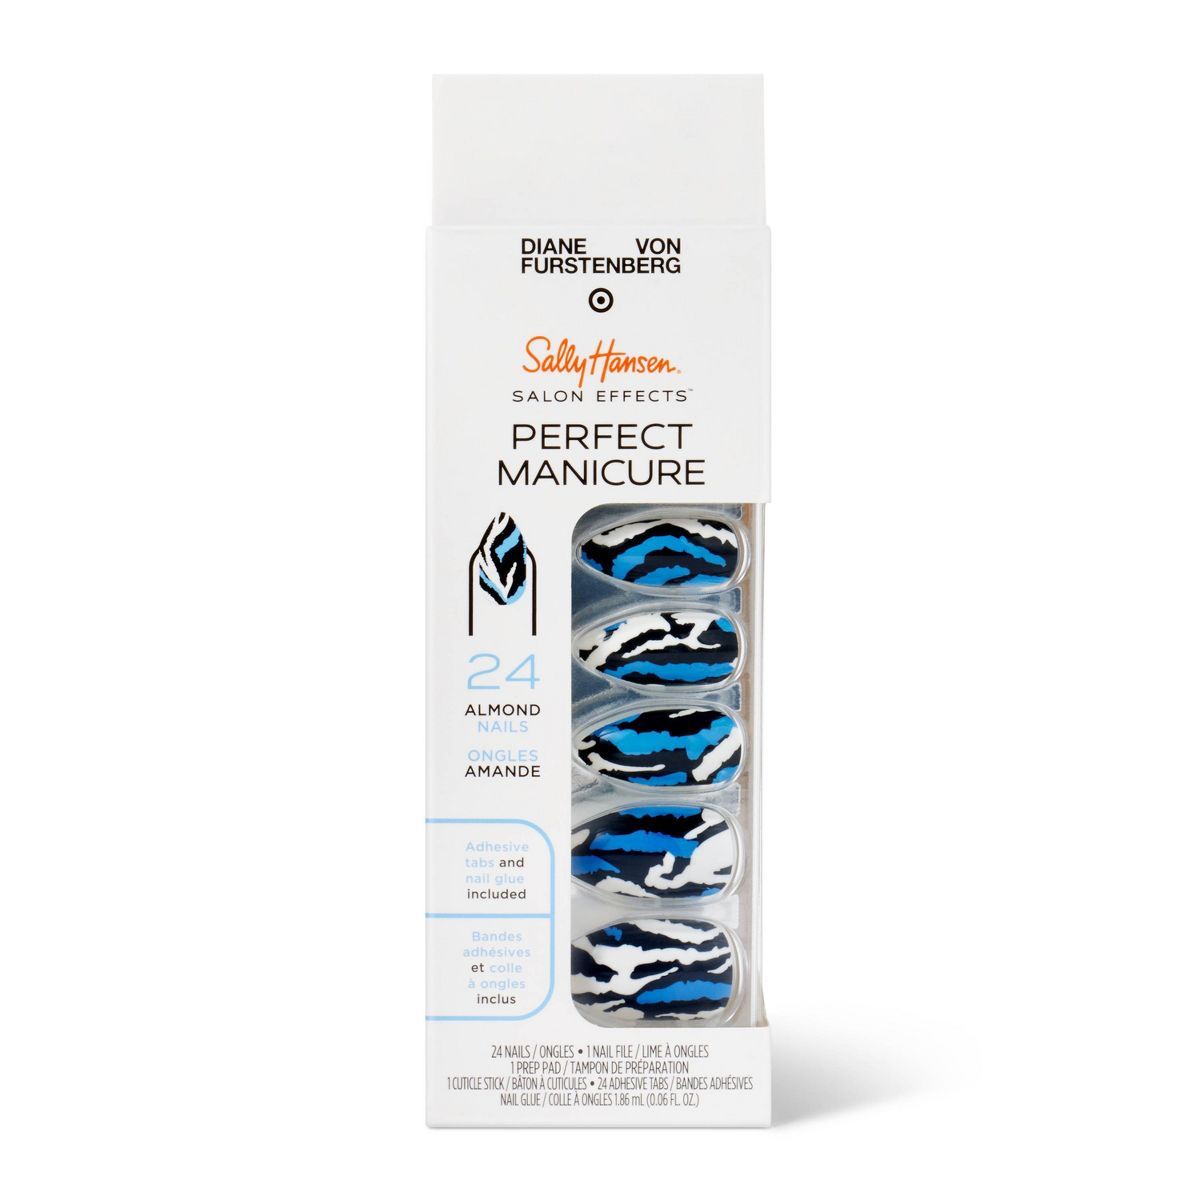 DVF for Target x Sally Hansen Salon Effects Perfect Manicure - 24ct | Target